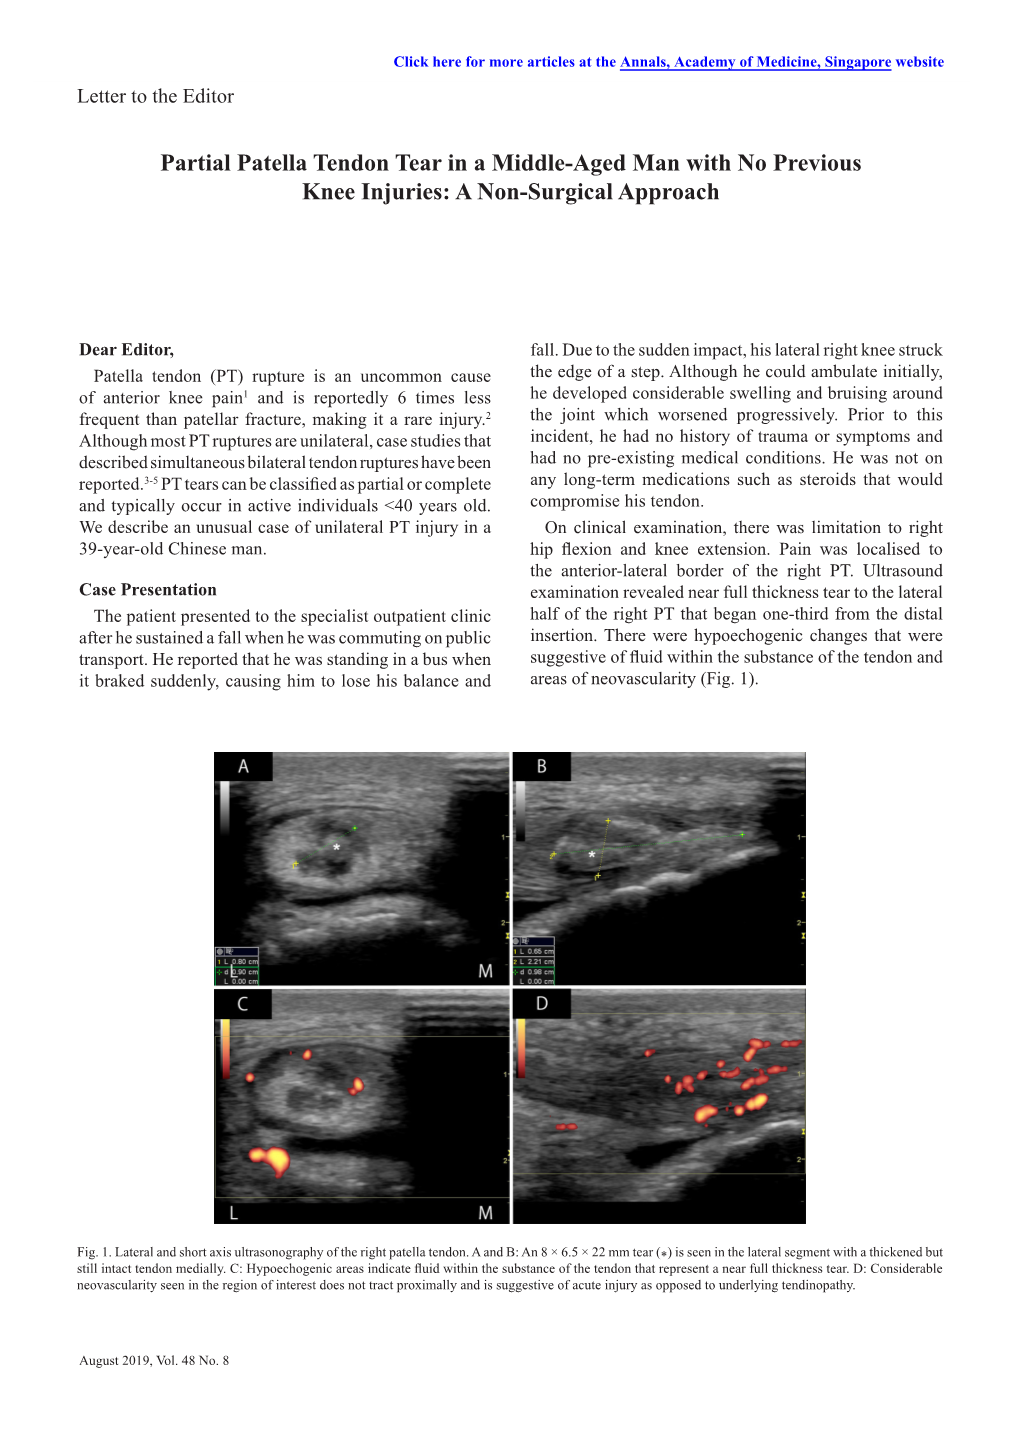 Partial Patella Tendon Tear in a Middle-Aged Man with No Previous Knee Injuries: a Non-Surgical Approach